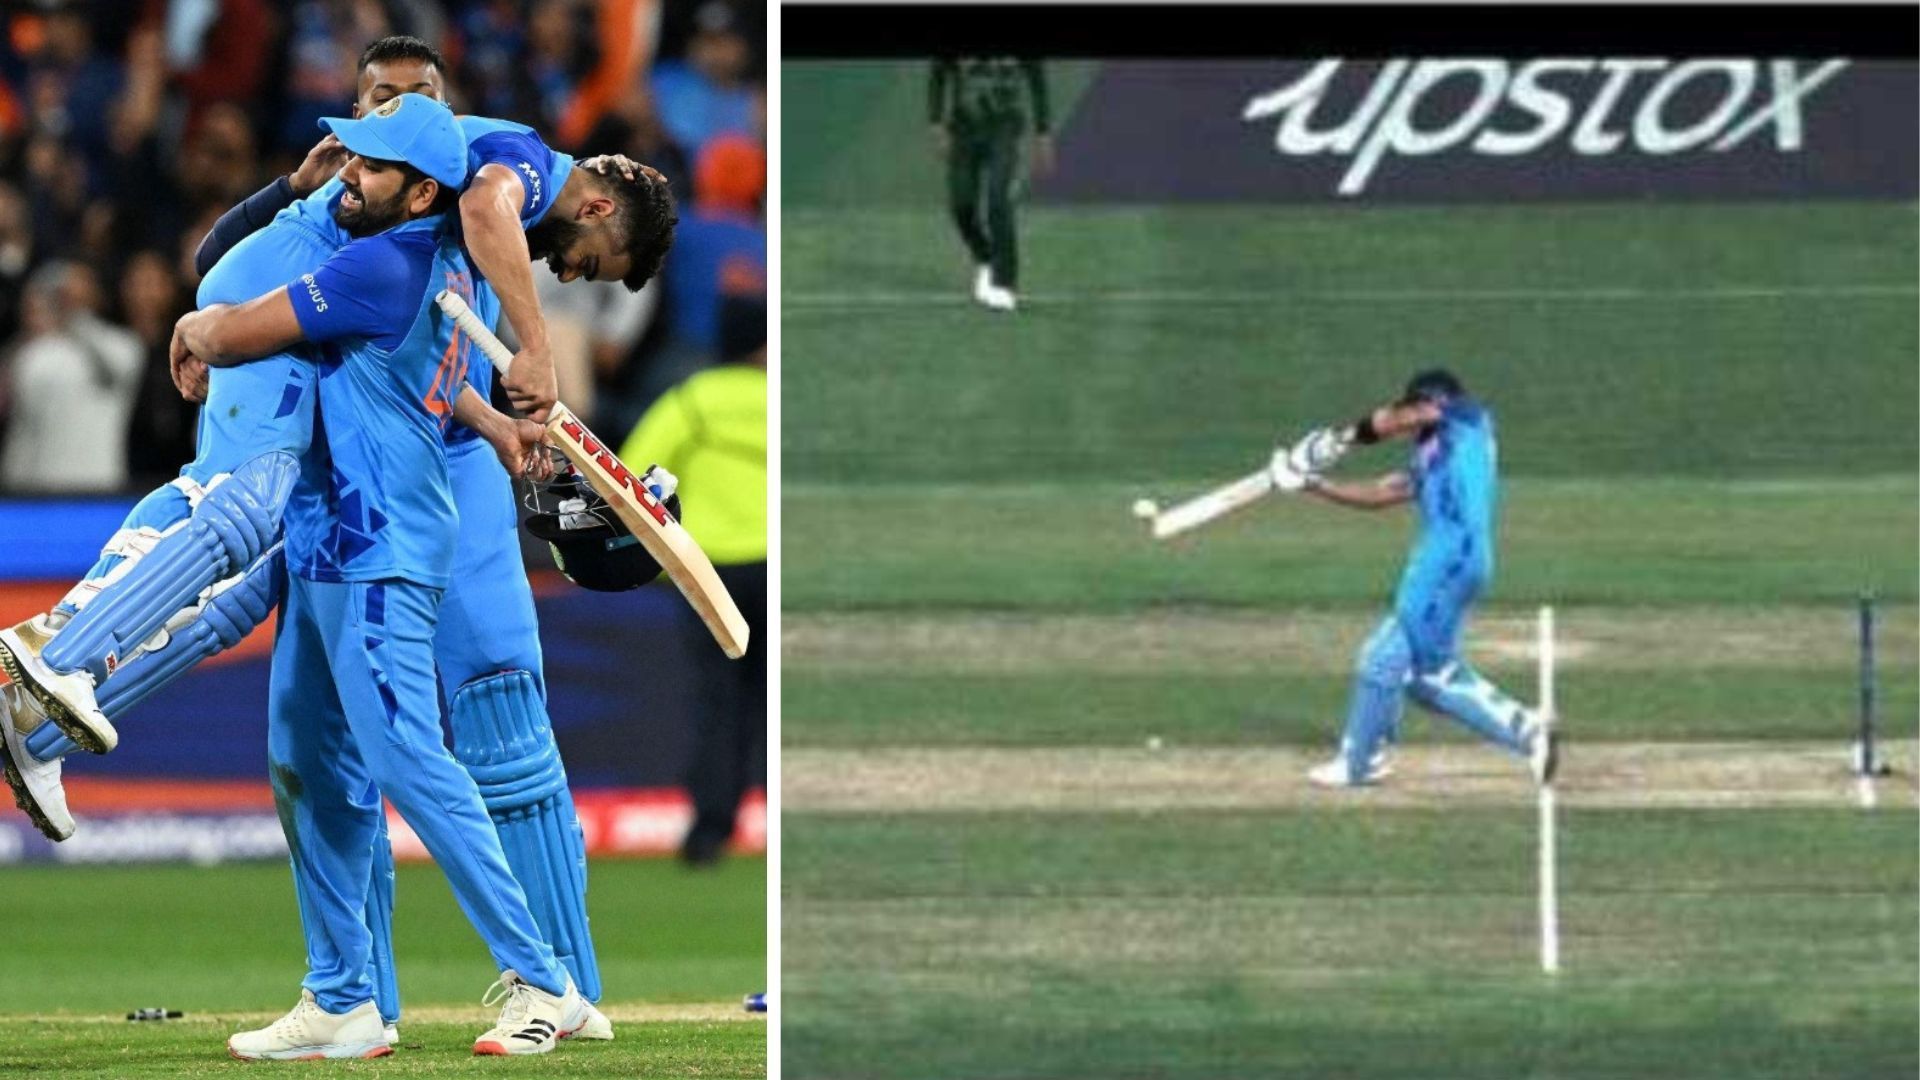 Some moments from the India vs Pakistan encounter that became talking points for fans. (P.C.:Twitter)